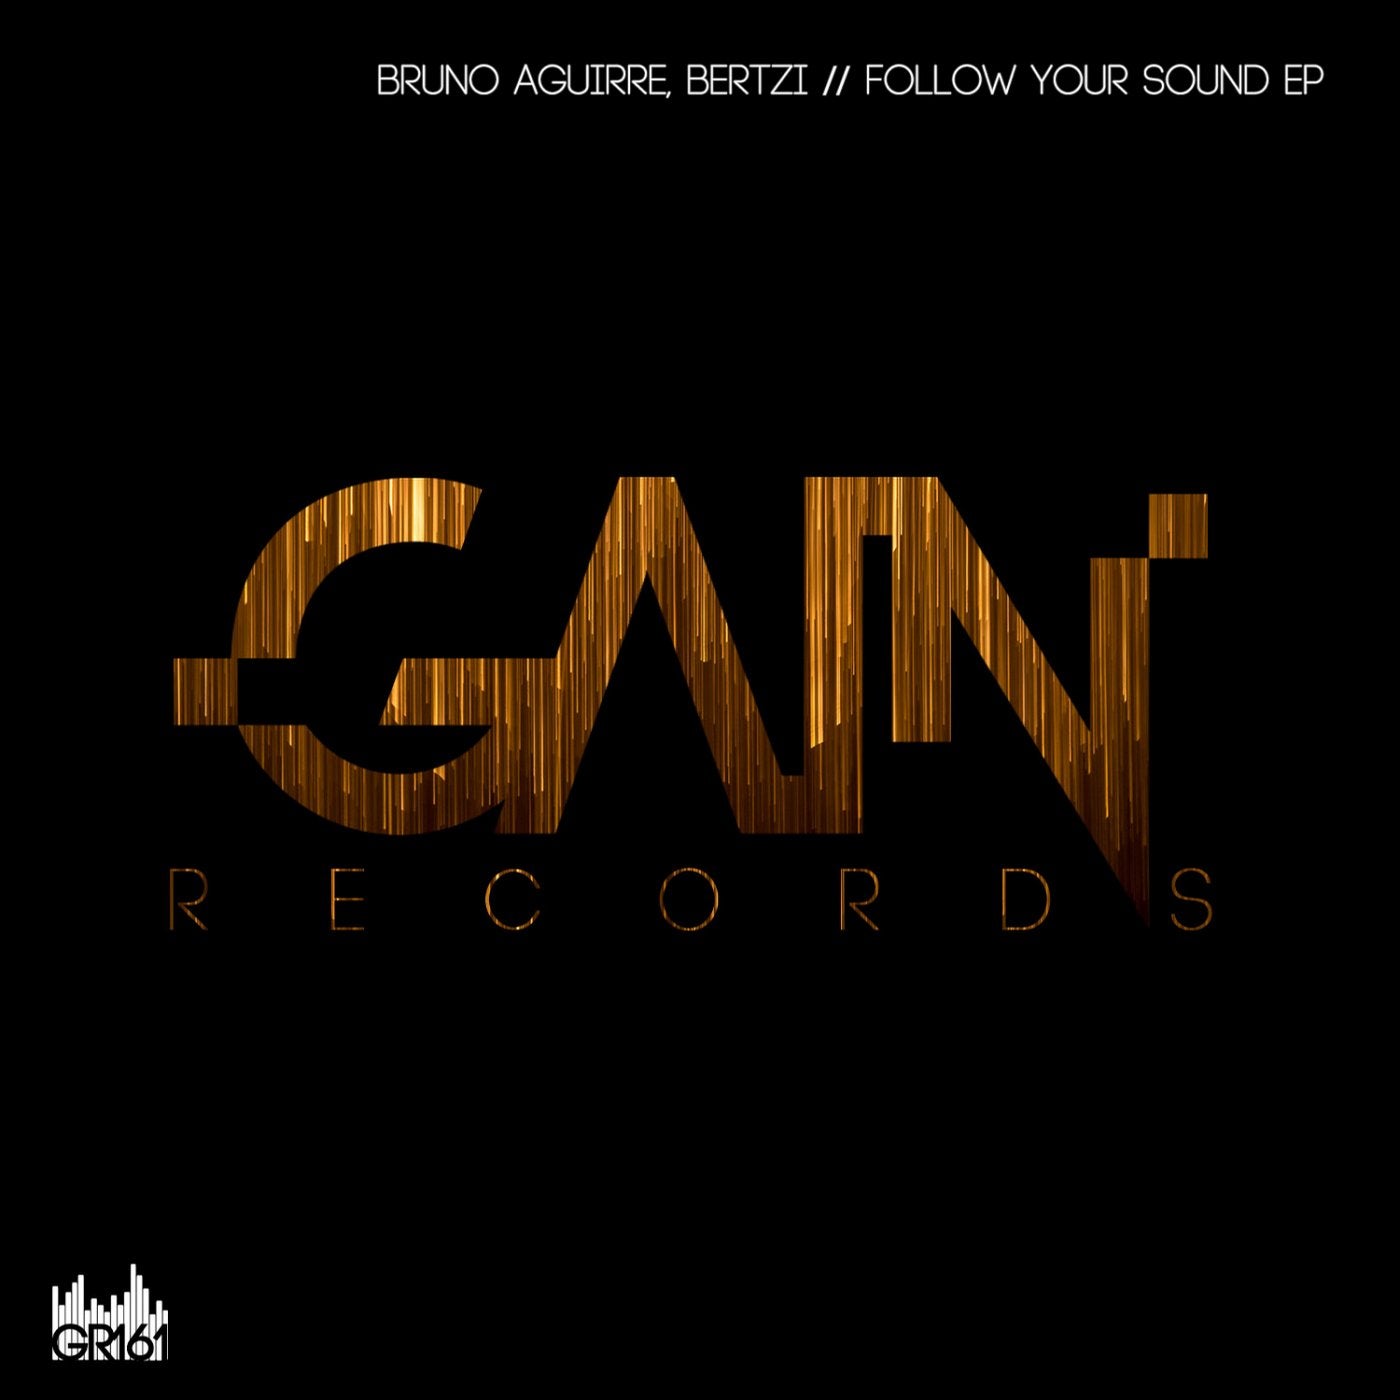 Follow Your Sound EP